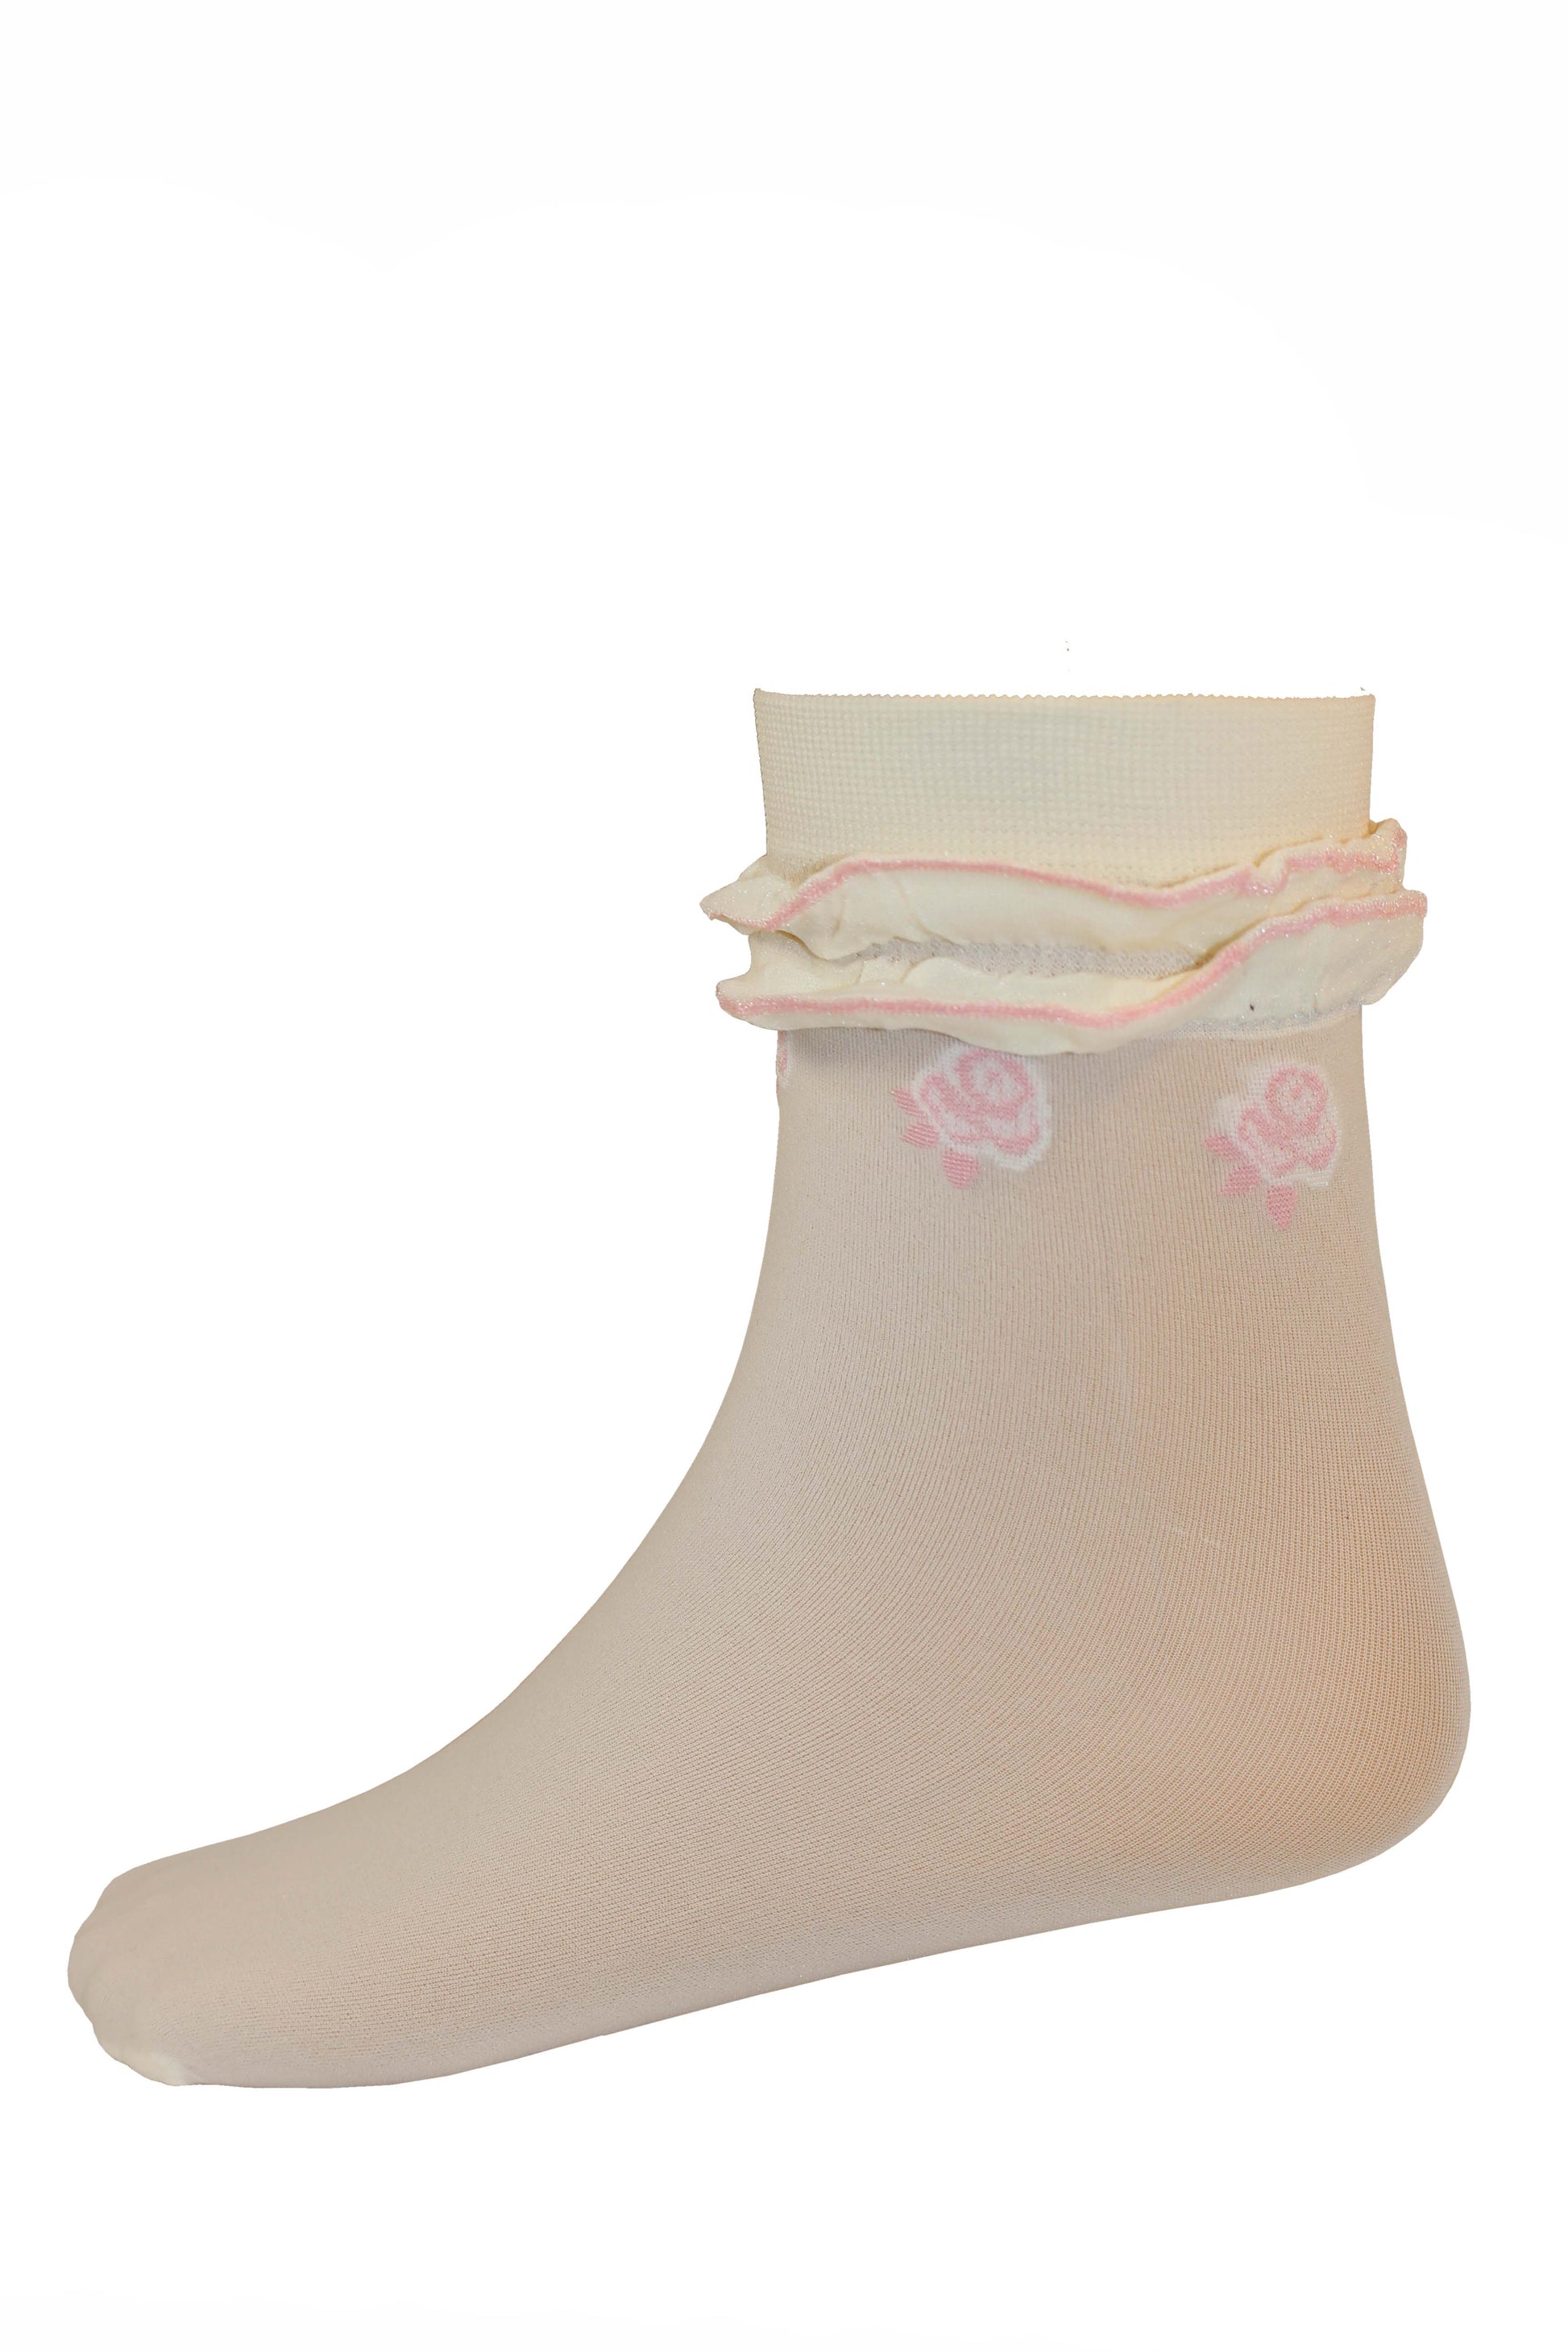 Omsa Lulu Calzino - Ivory cream opaque children's fashion ankle socks with a double frill cuff, rose pattern under the cuff and a back seam with a bow detail in pink and off white.